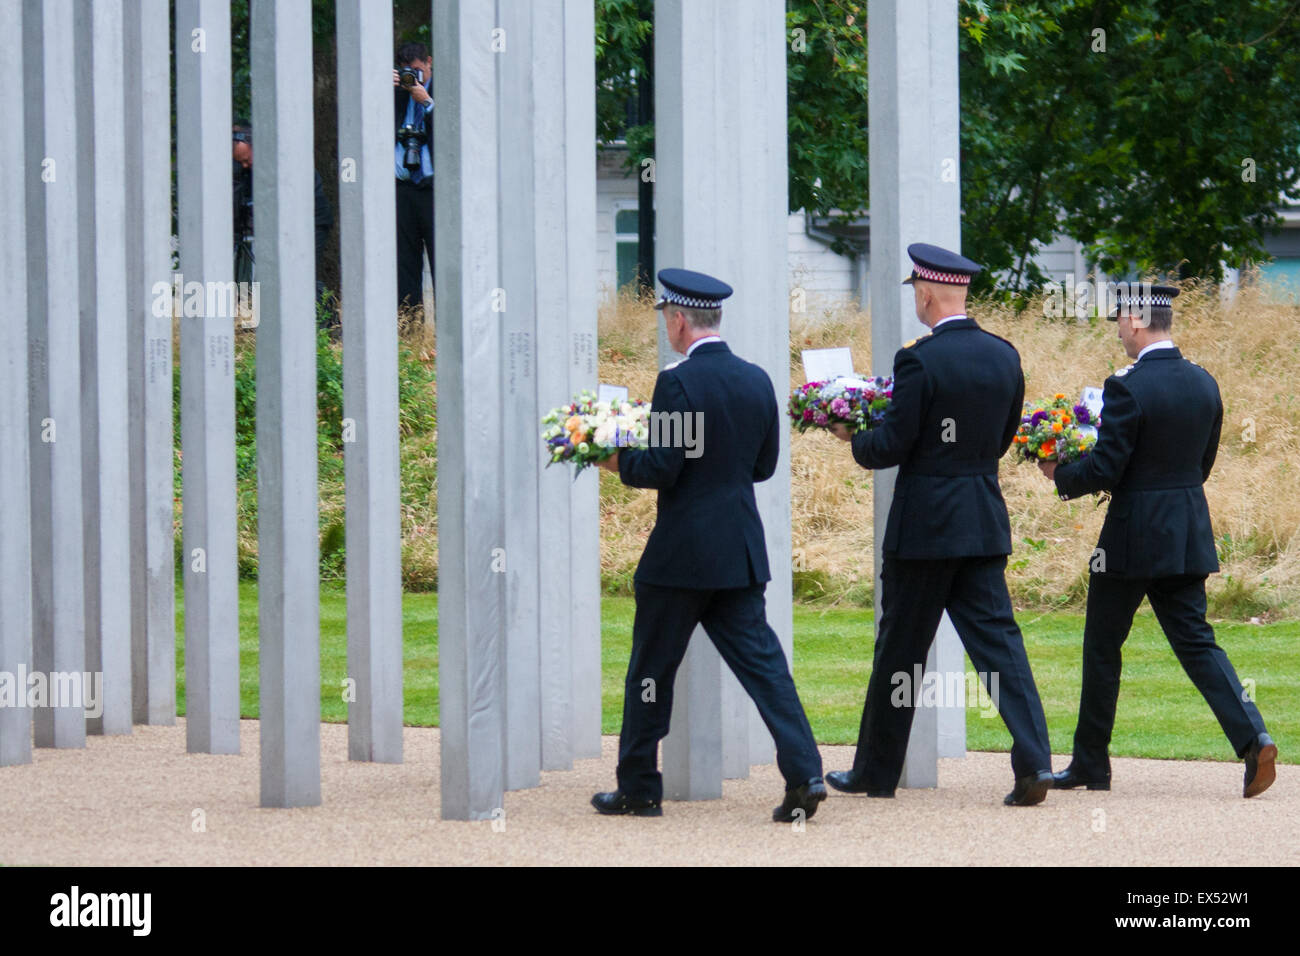 Hyde Park, London, July7th 2015. The Mayor of London Boris Johnson and other senior political figures, the Commissioners for transport and policing in the capital, as well as senior representatives of the emergency services lay wreaths at the 7/7 memorial in Hyde Park. PICTURED: Police Commissioners prepare to lay their wreaths. Credit:  Paul Davey/Alamy Live News Stock Photo